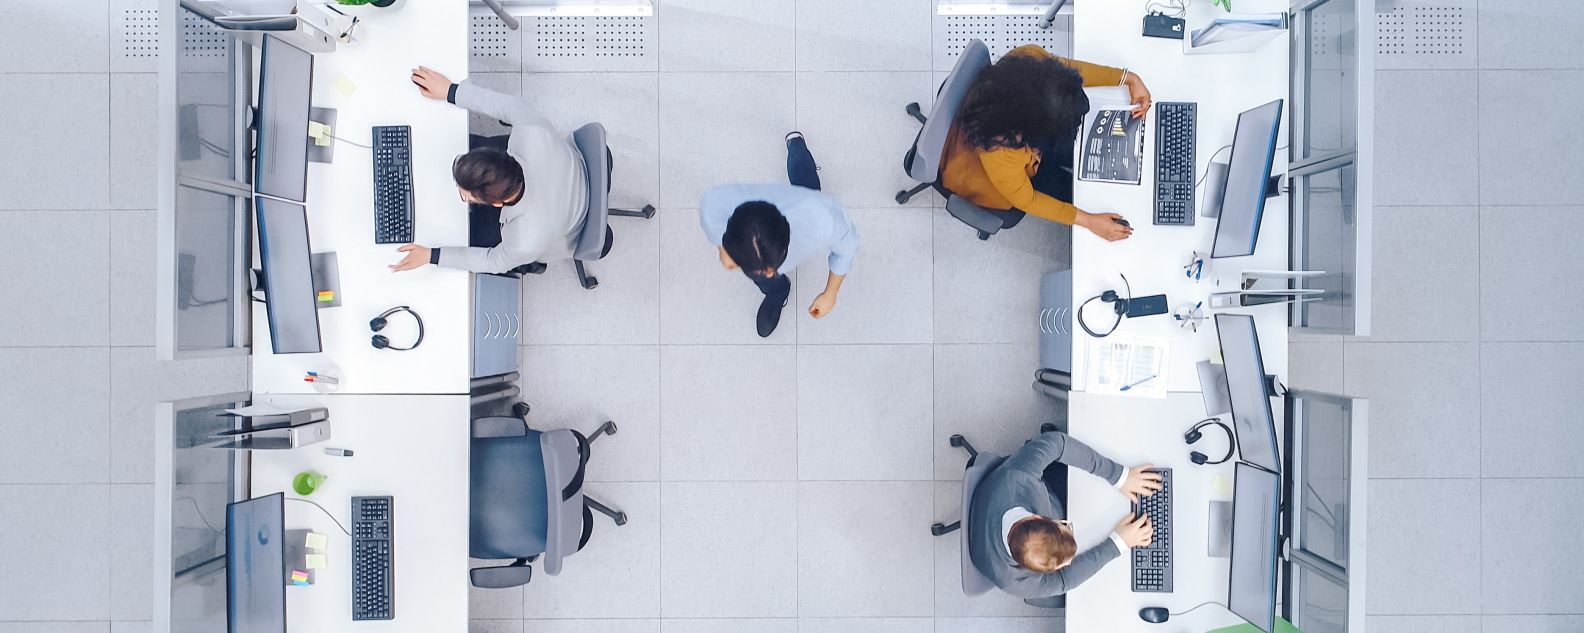 Aerial view looking down on shared office, with workers at individual desks